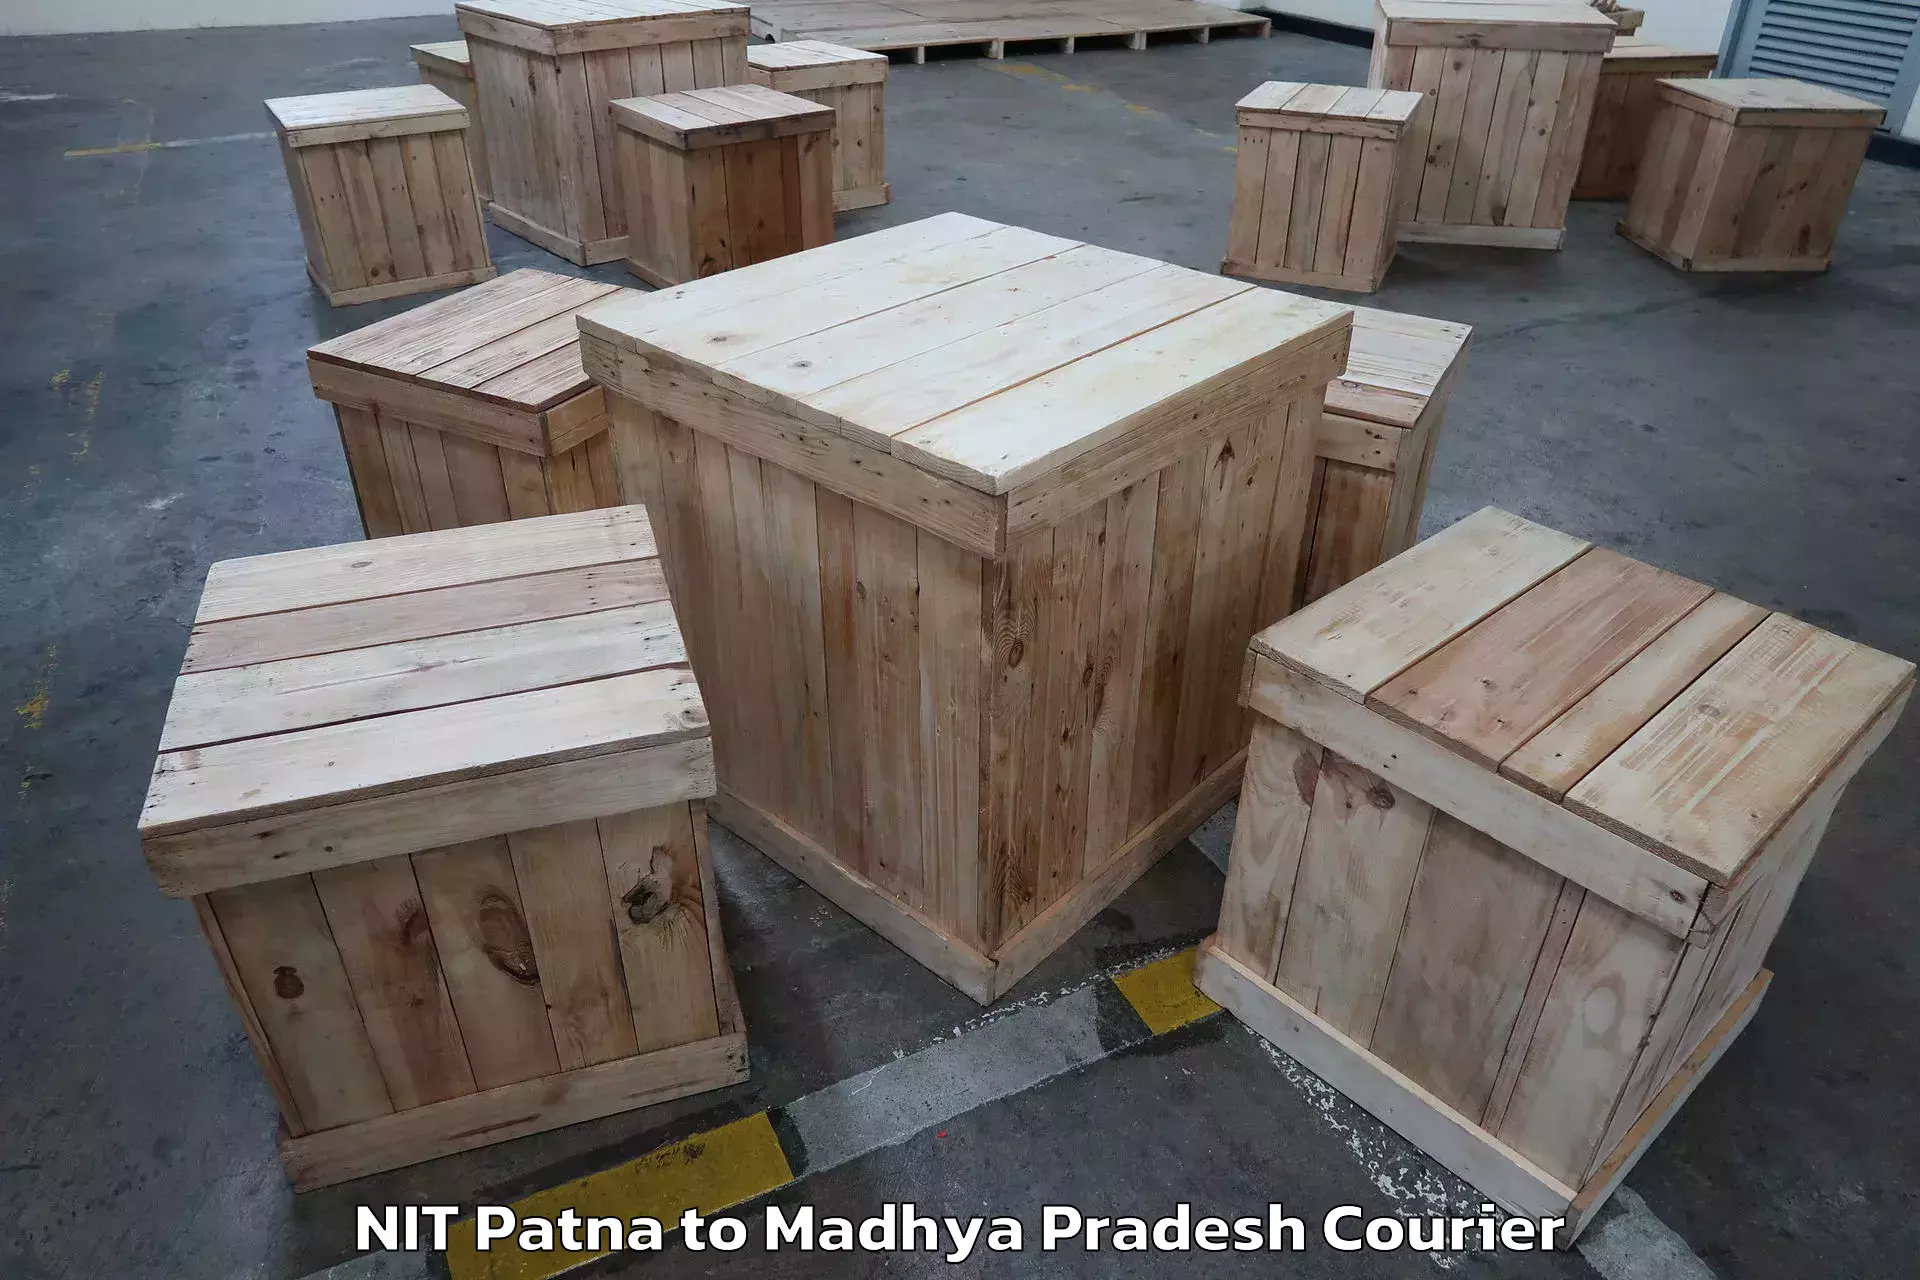 Moving and storage services in NIT Patna to IIIT Bhopal